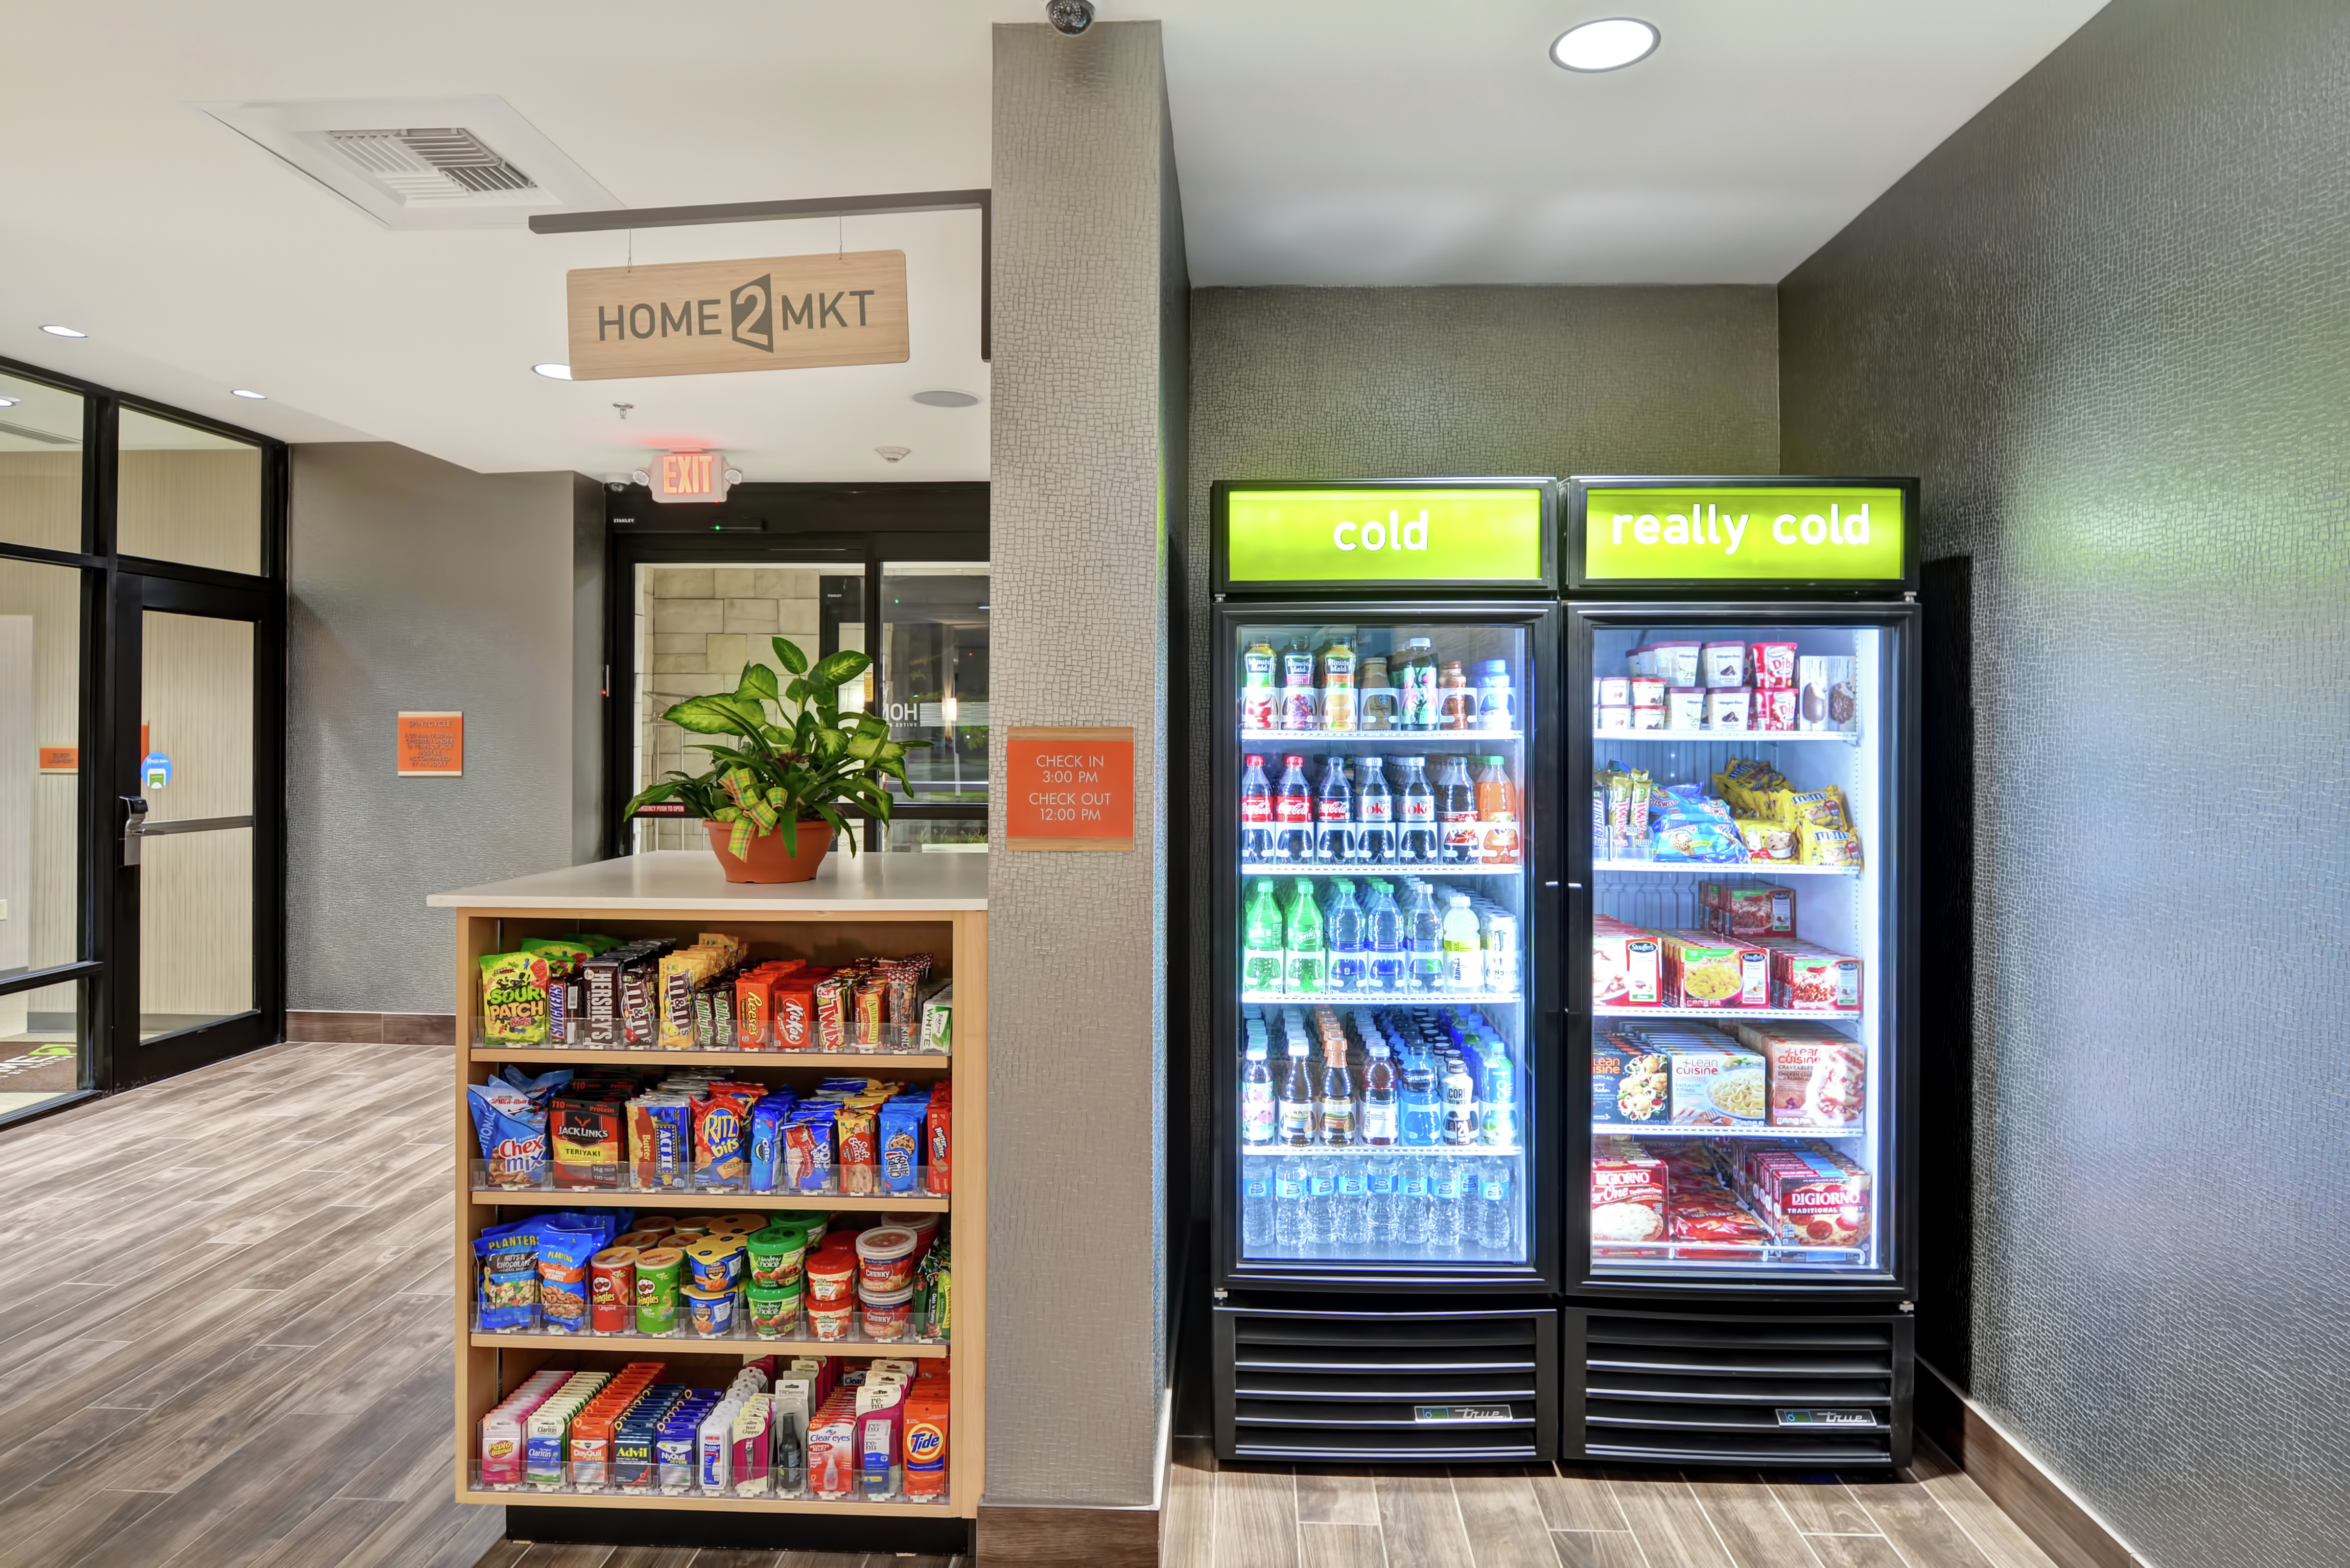 Snack Shop with Cold Beverages, Meals and Treats for Purchase